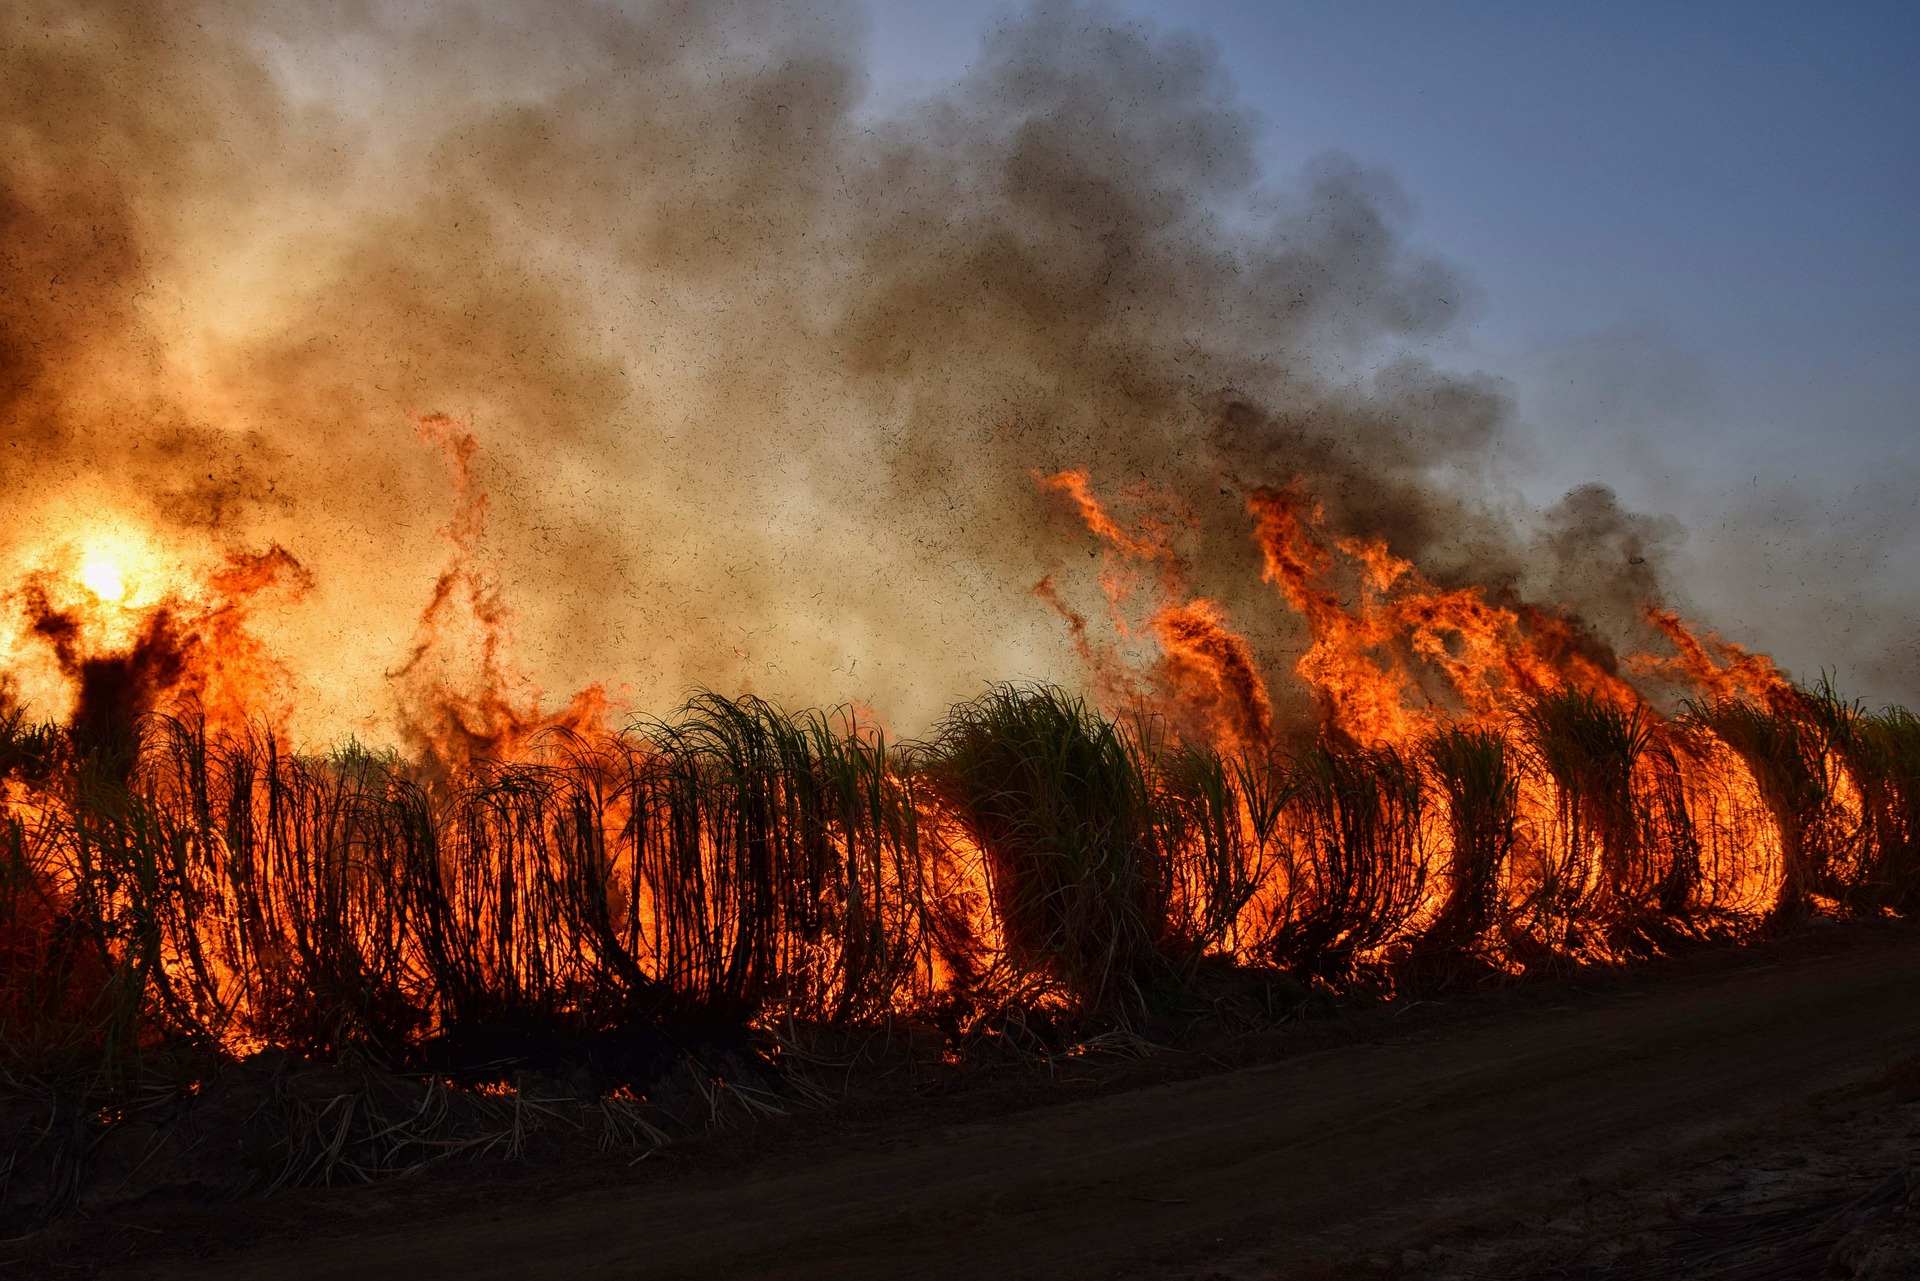 Glowing flames engulf brush on a mostly cloudless day, as puffs of black smoke rise into the atmosphere.